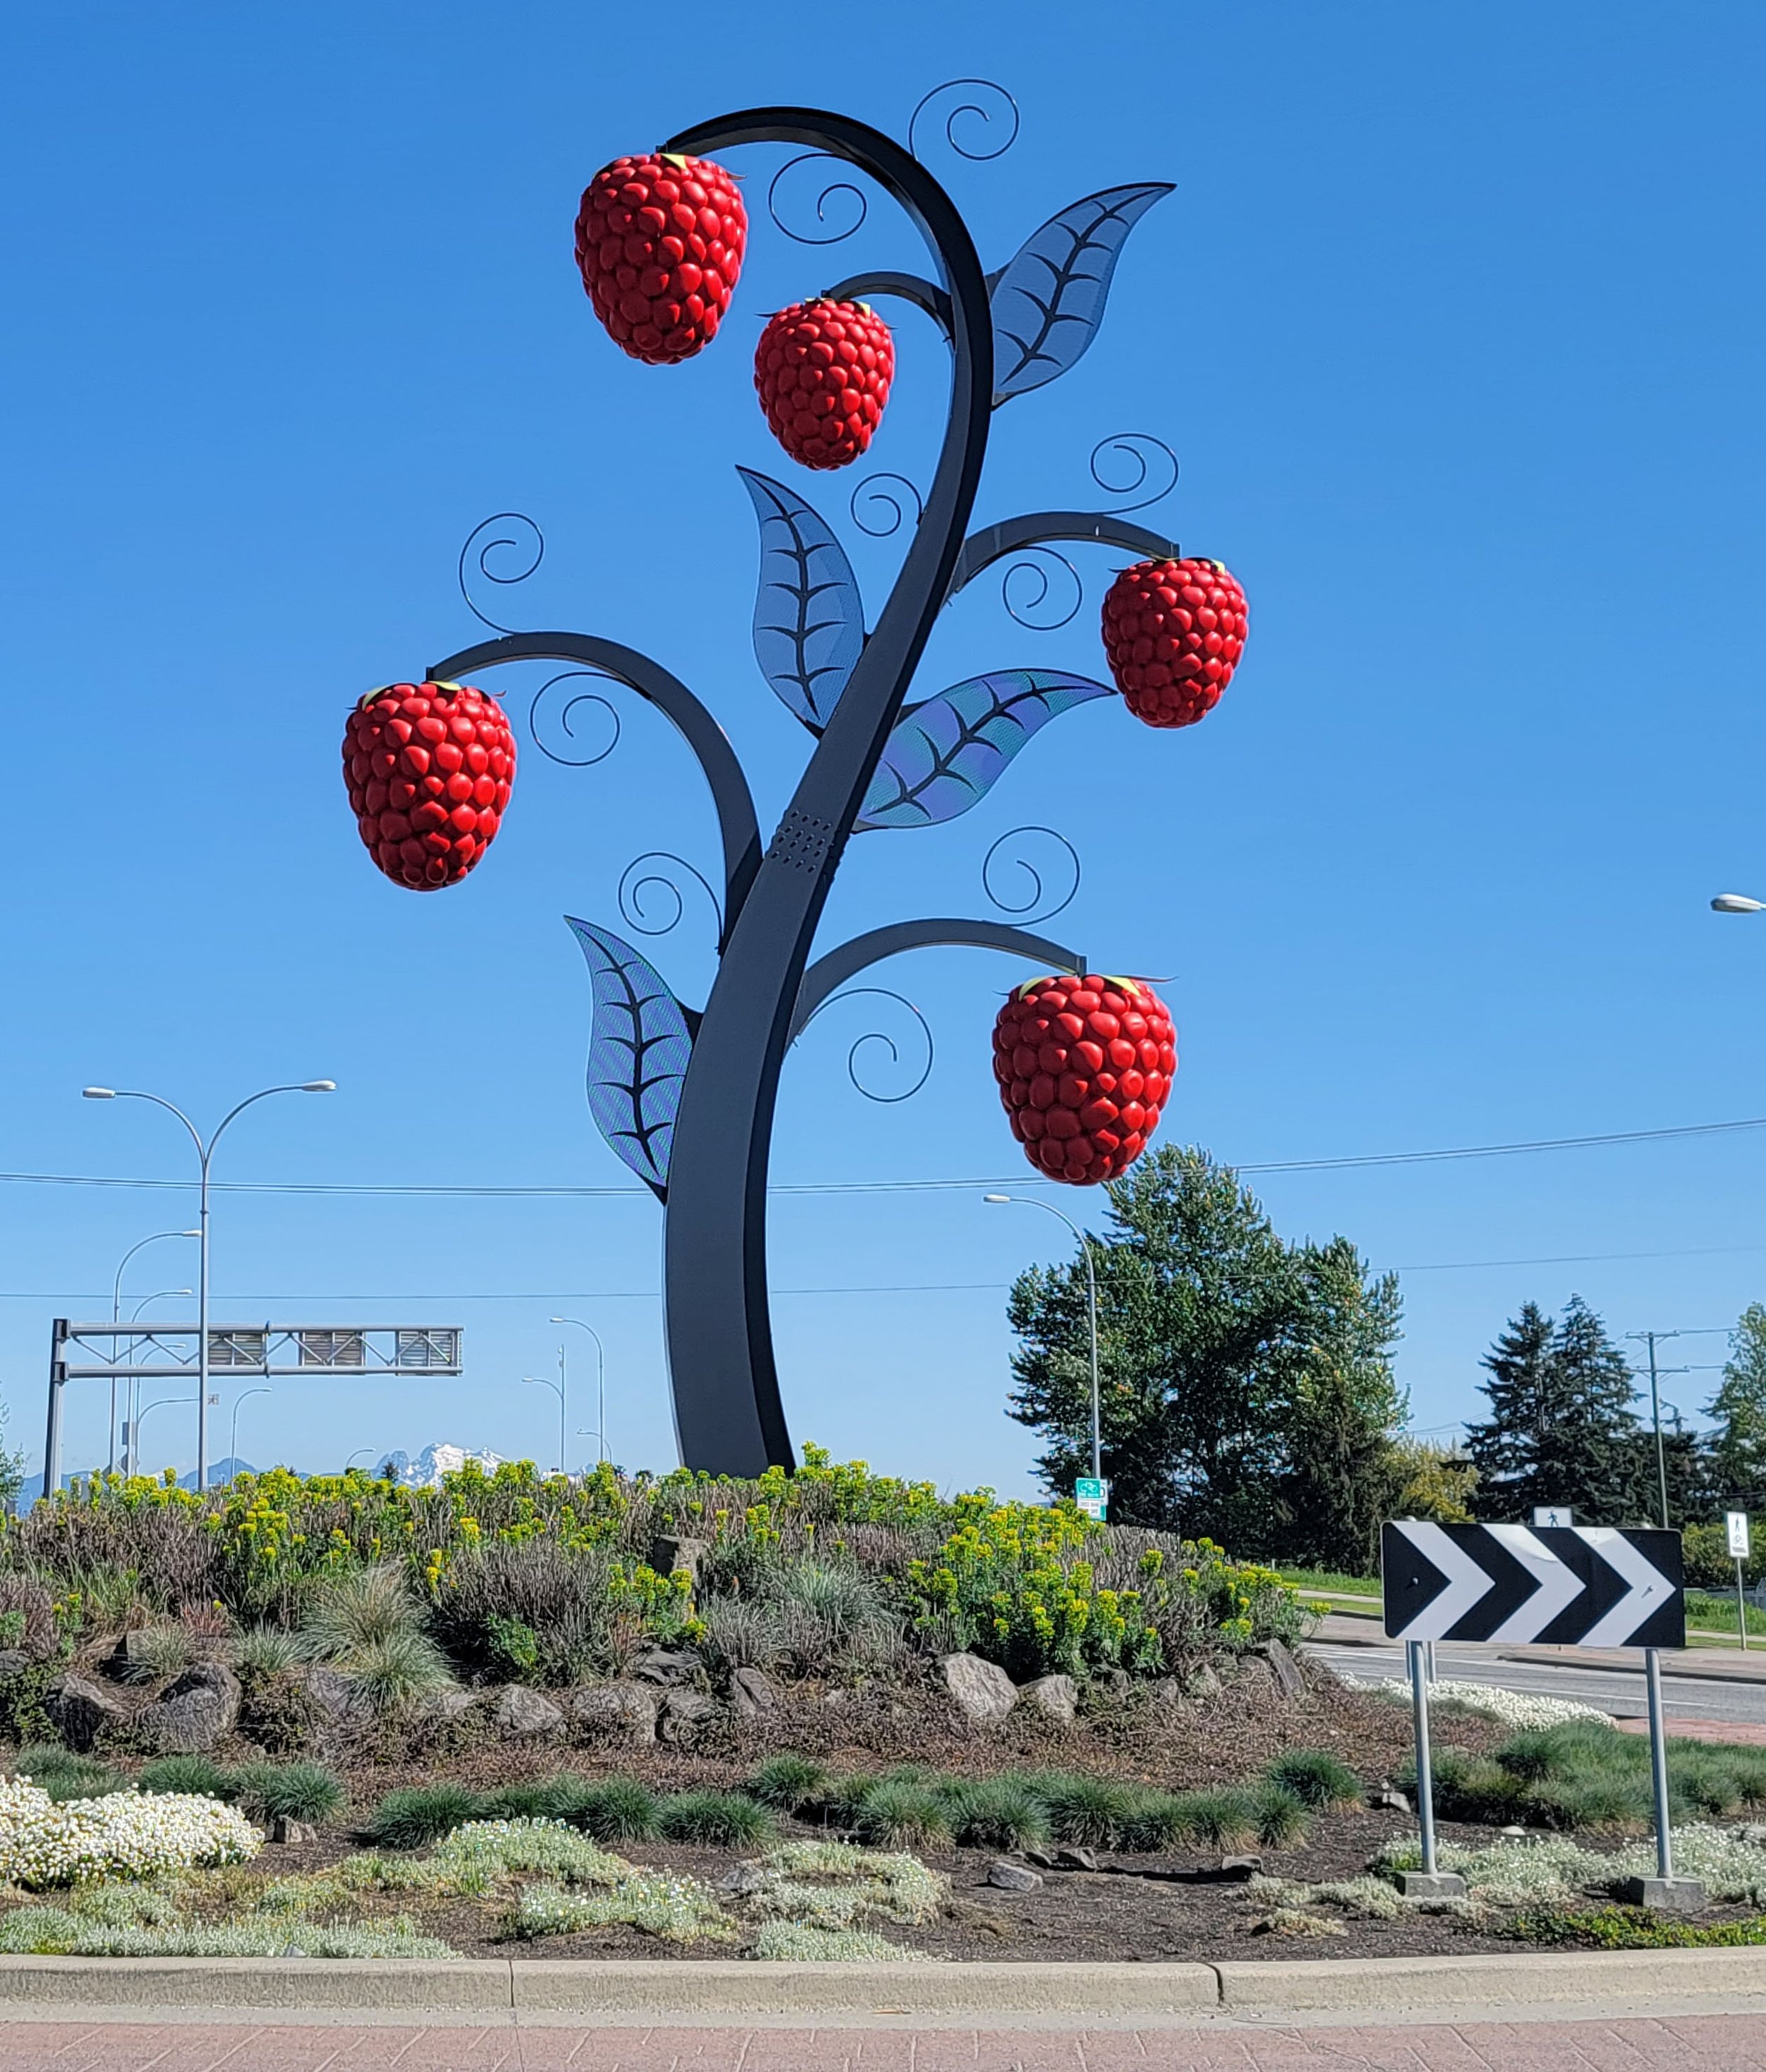 The giant Raspberries in the middle of a roundabout in Abbotsford.